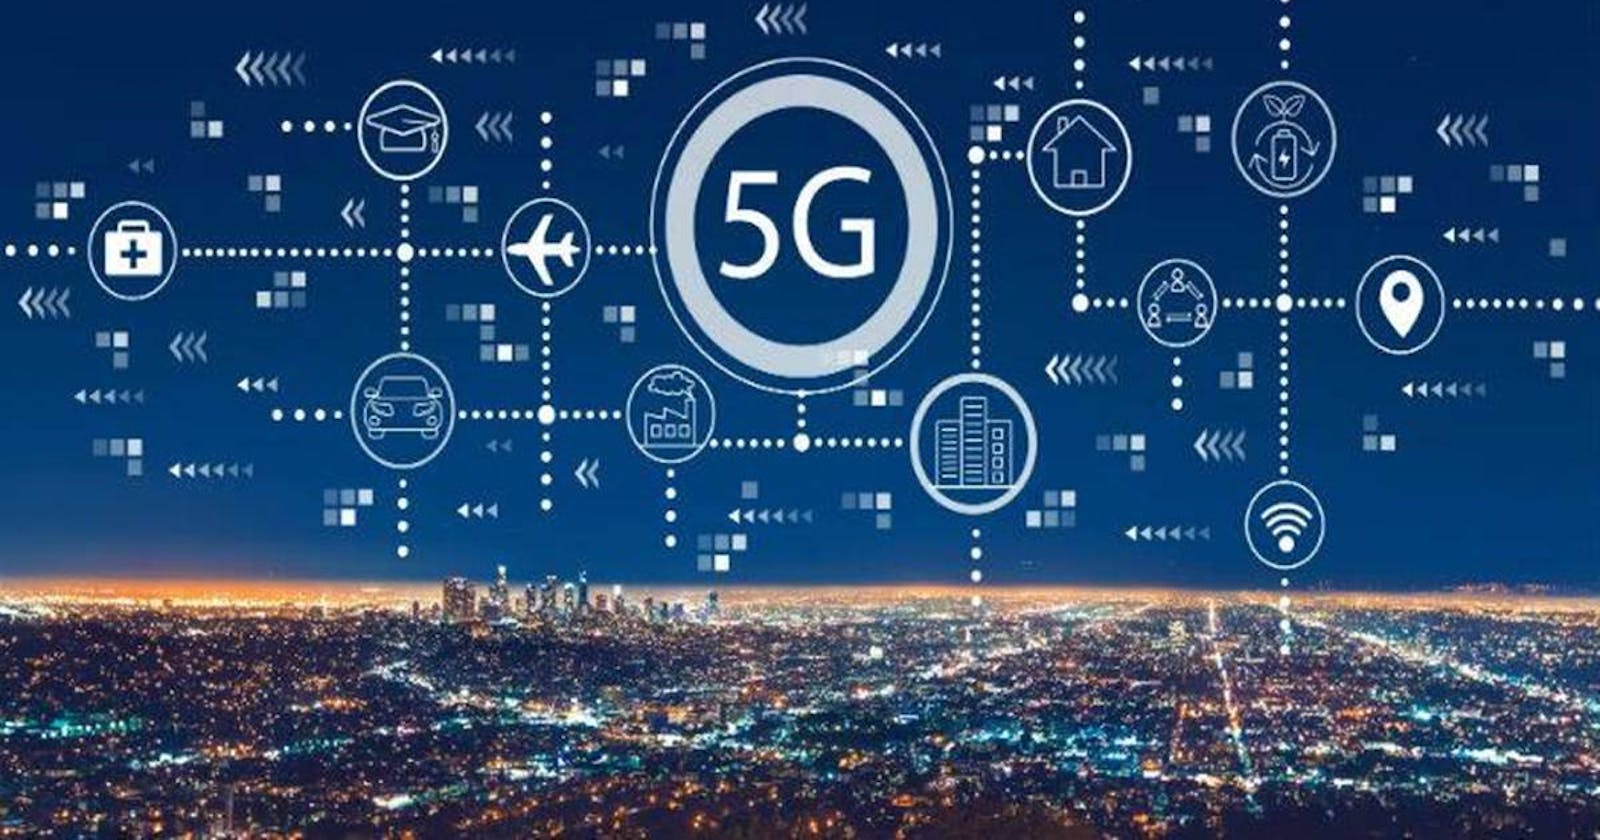 5G--5th generation mobile network